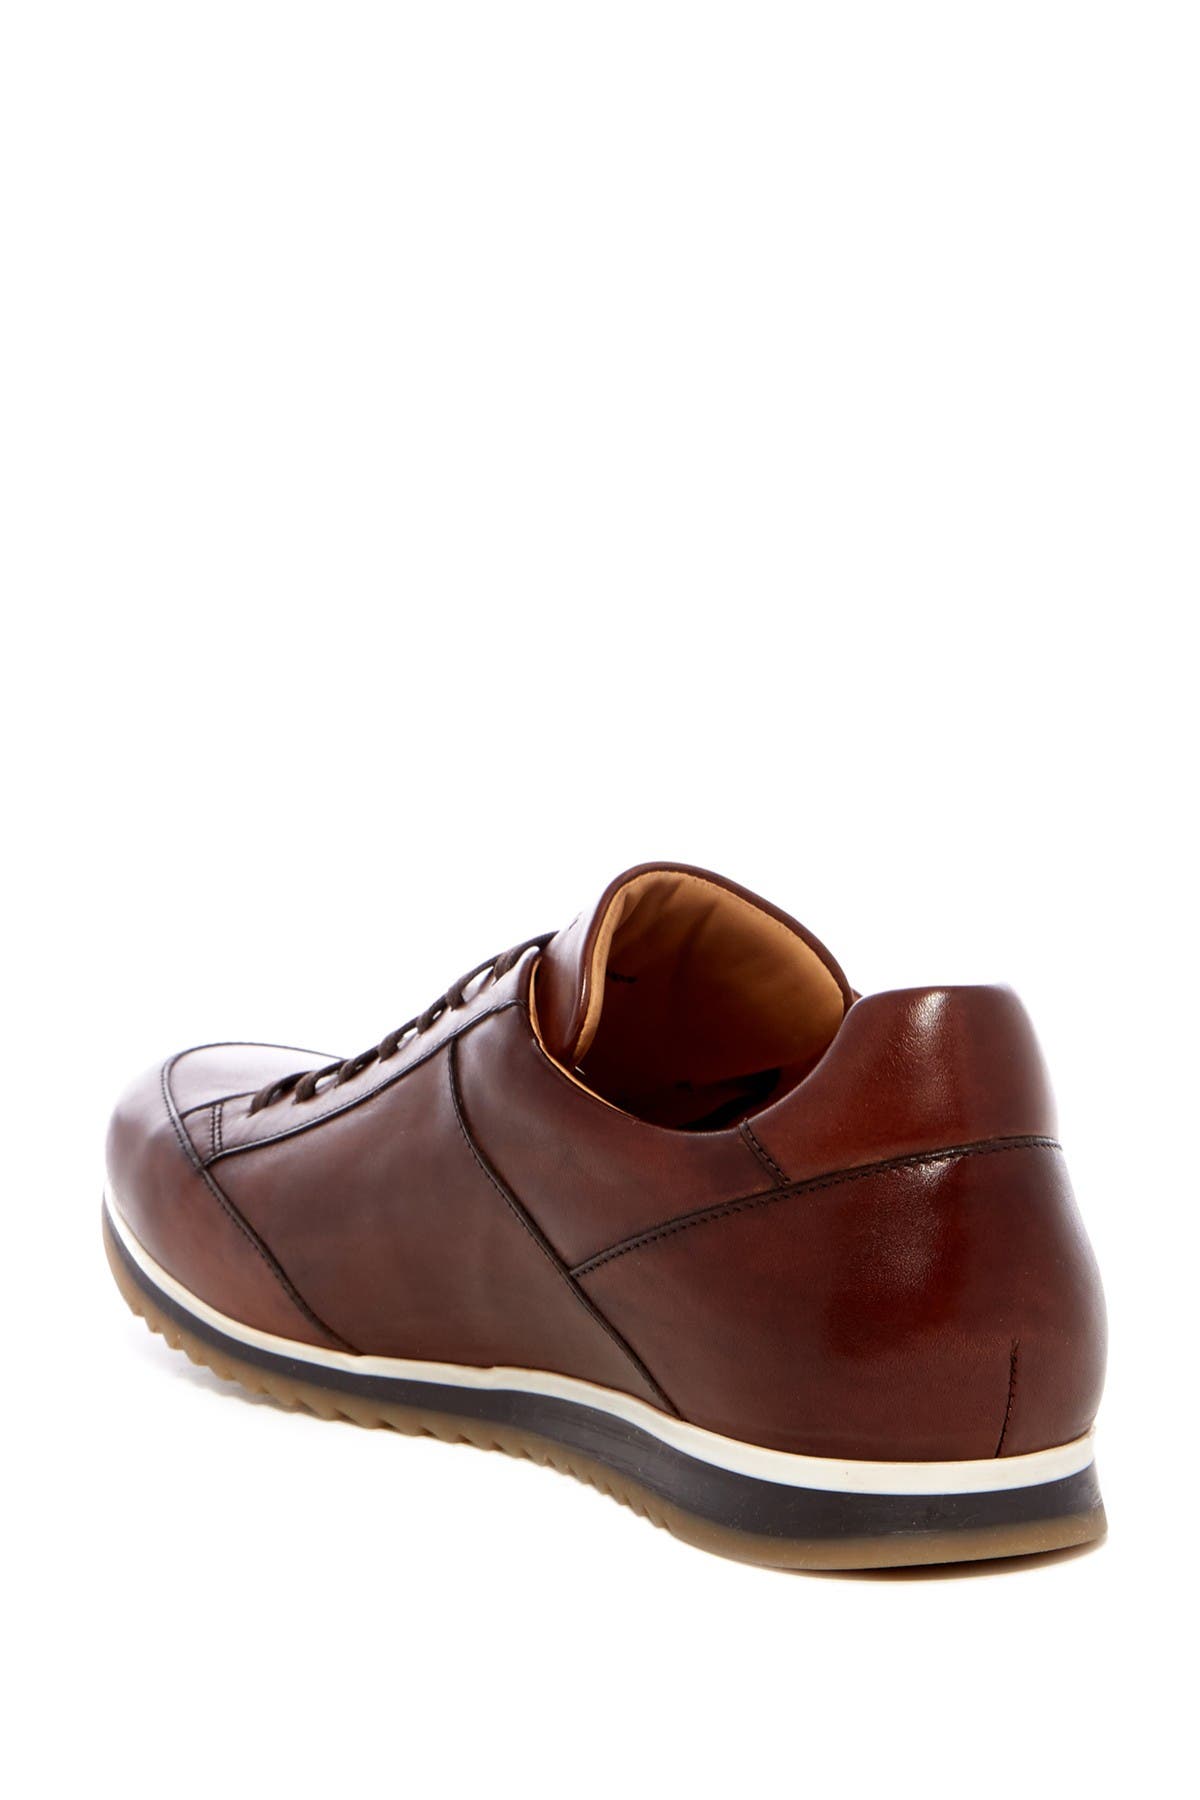 Magnanni | Chaz Leather Sneaker 